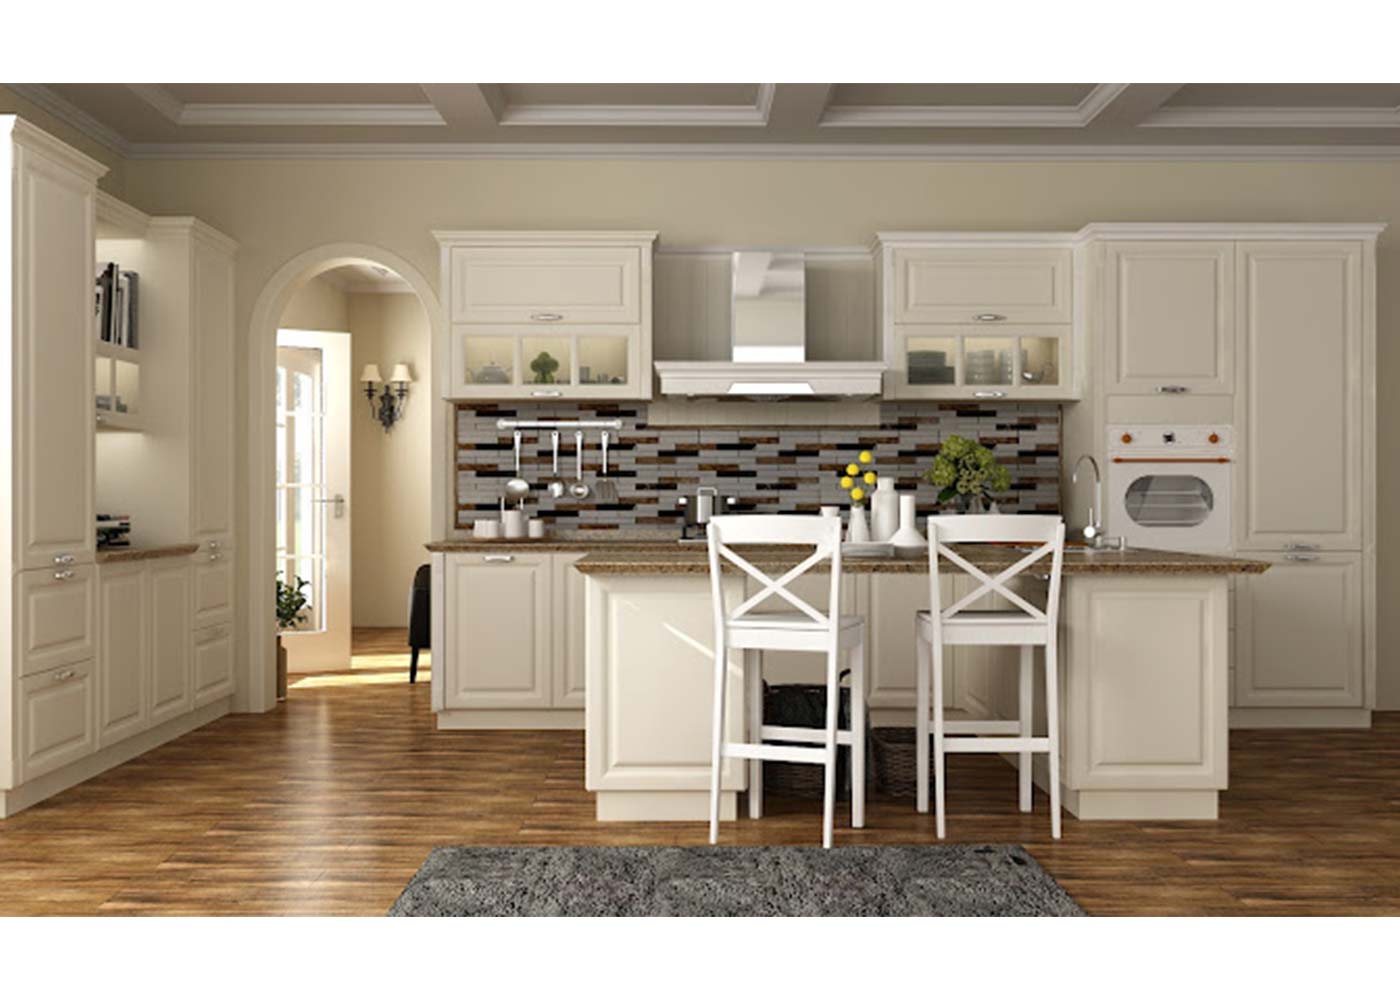 RTA Kitchen Cabinets: The Secret to a Beautiful and Functional Kitchen Renovation